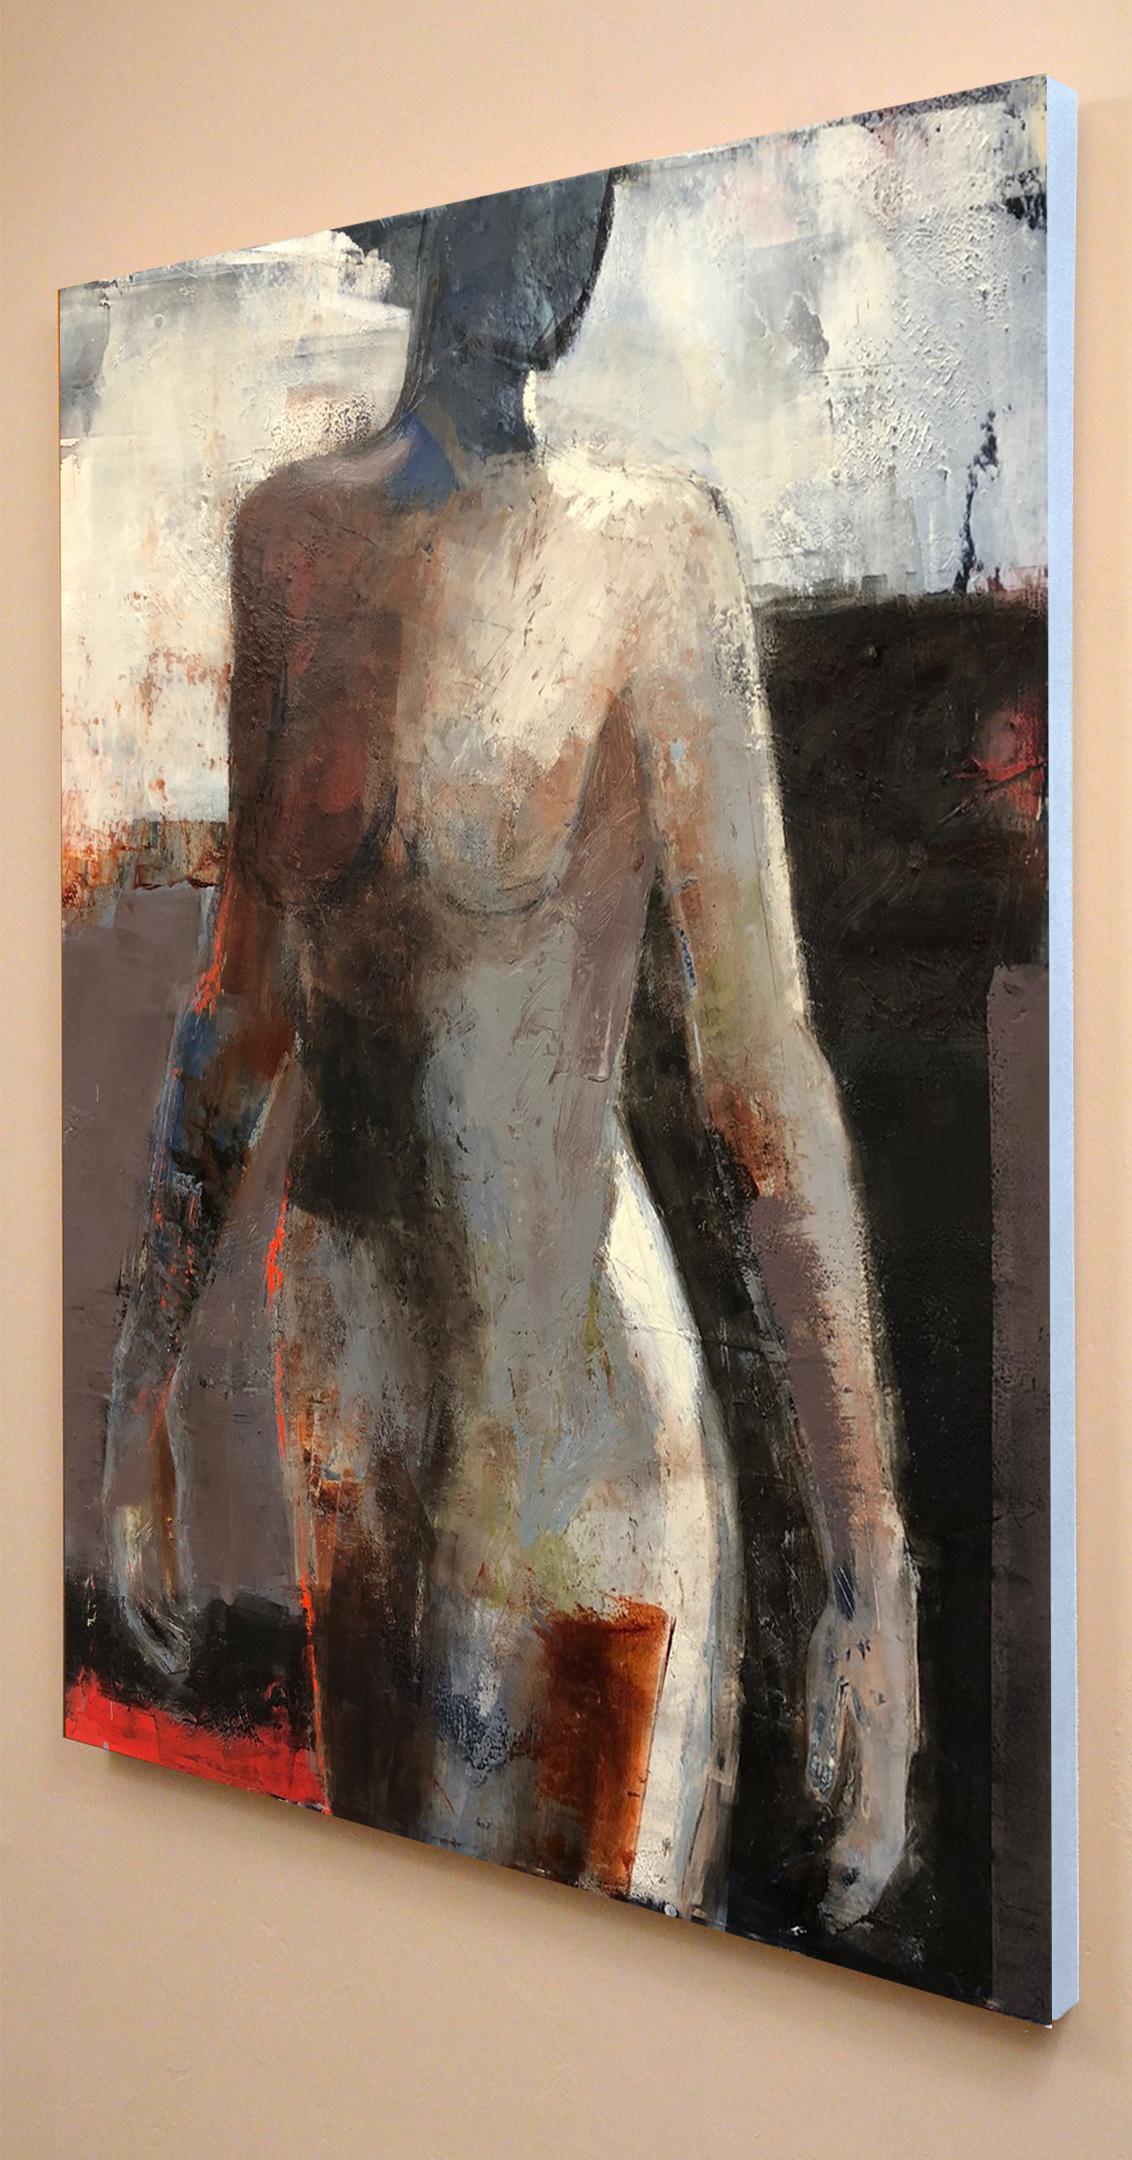 Opening, Mid Century Female Figure in Light, Abstract, Neutral Tones - Feminist Painting by Melinda Cootsona